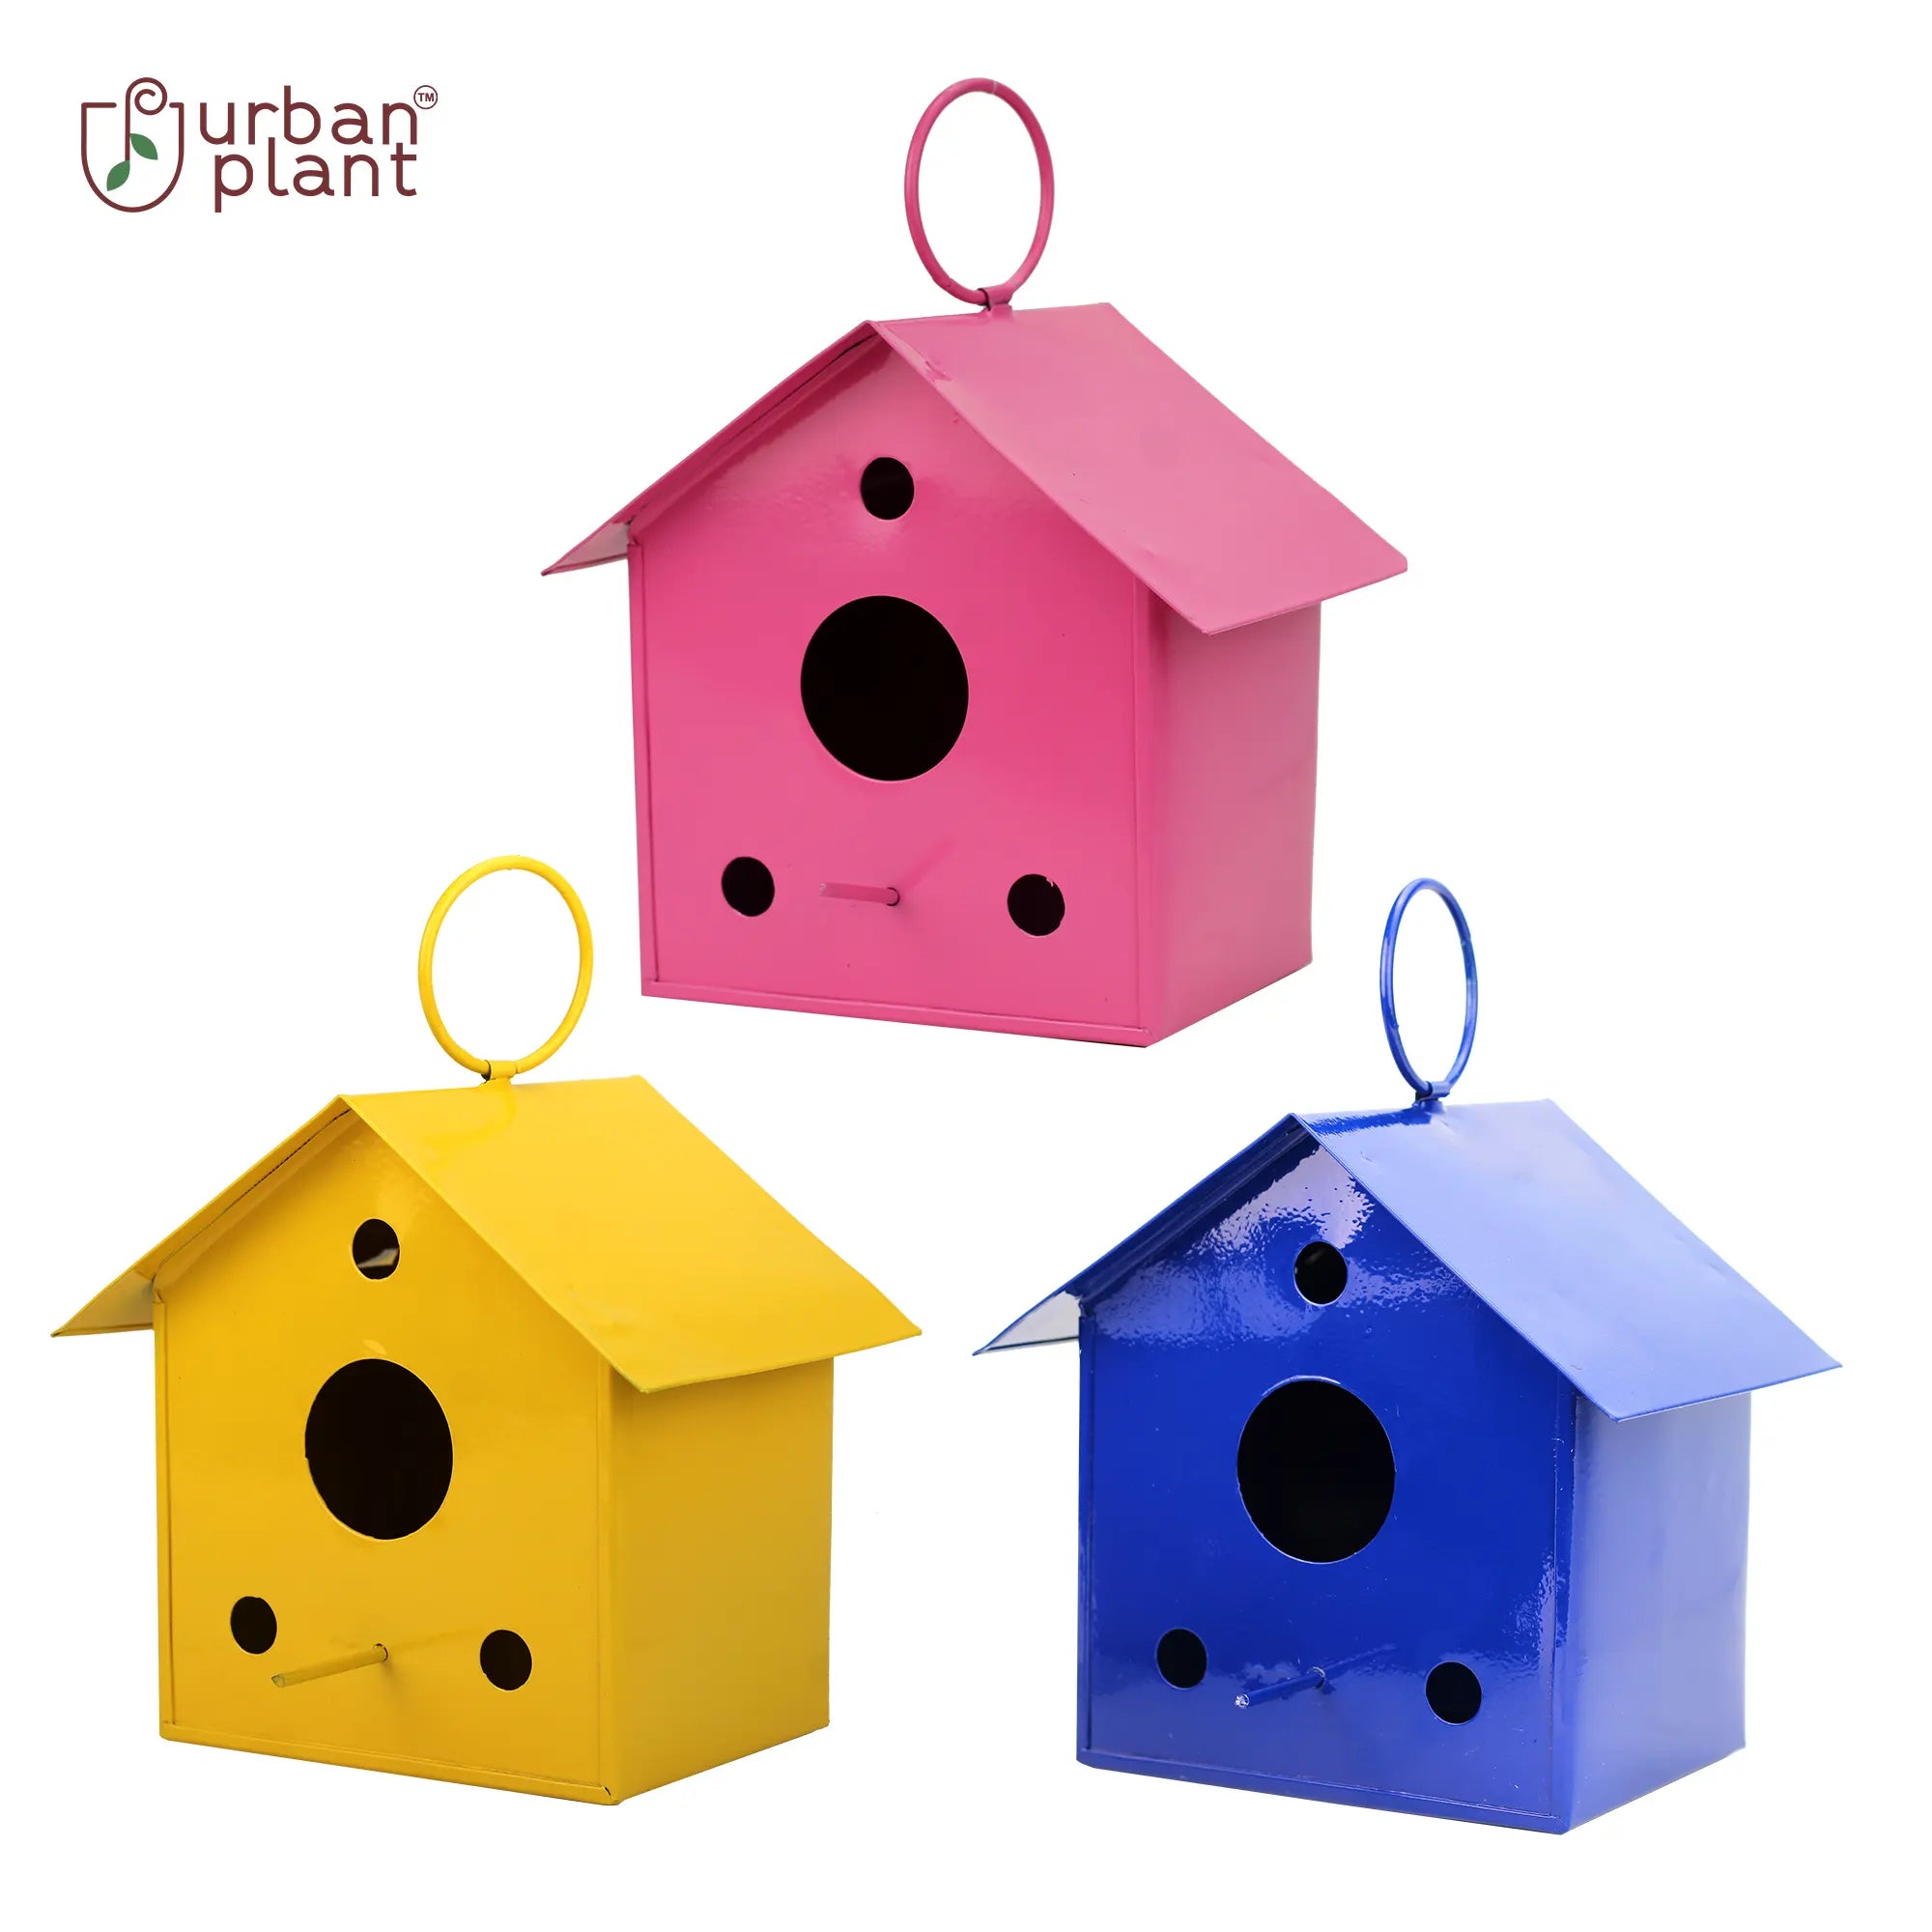 Colorful Metal Hanging Bird House-Set of 3 Oval Balcony Hanging Pot Urban Plant 